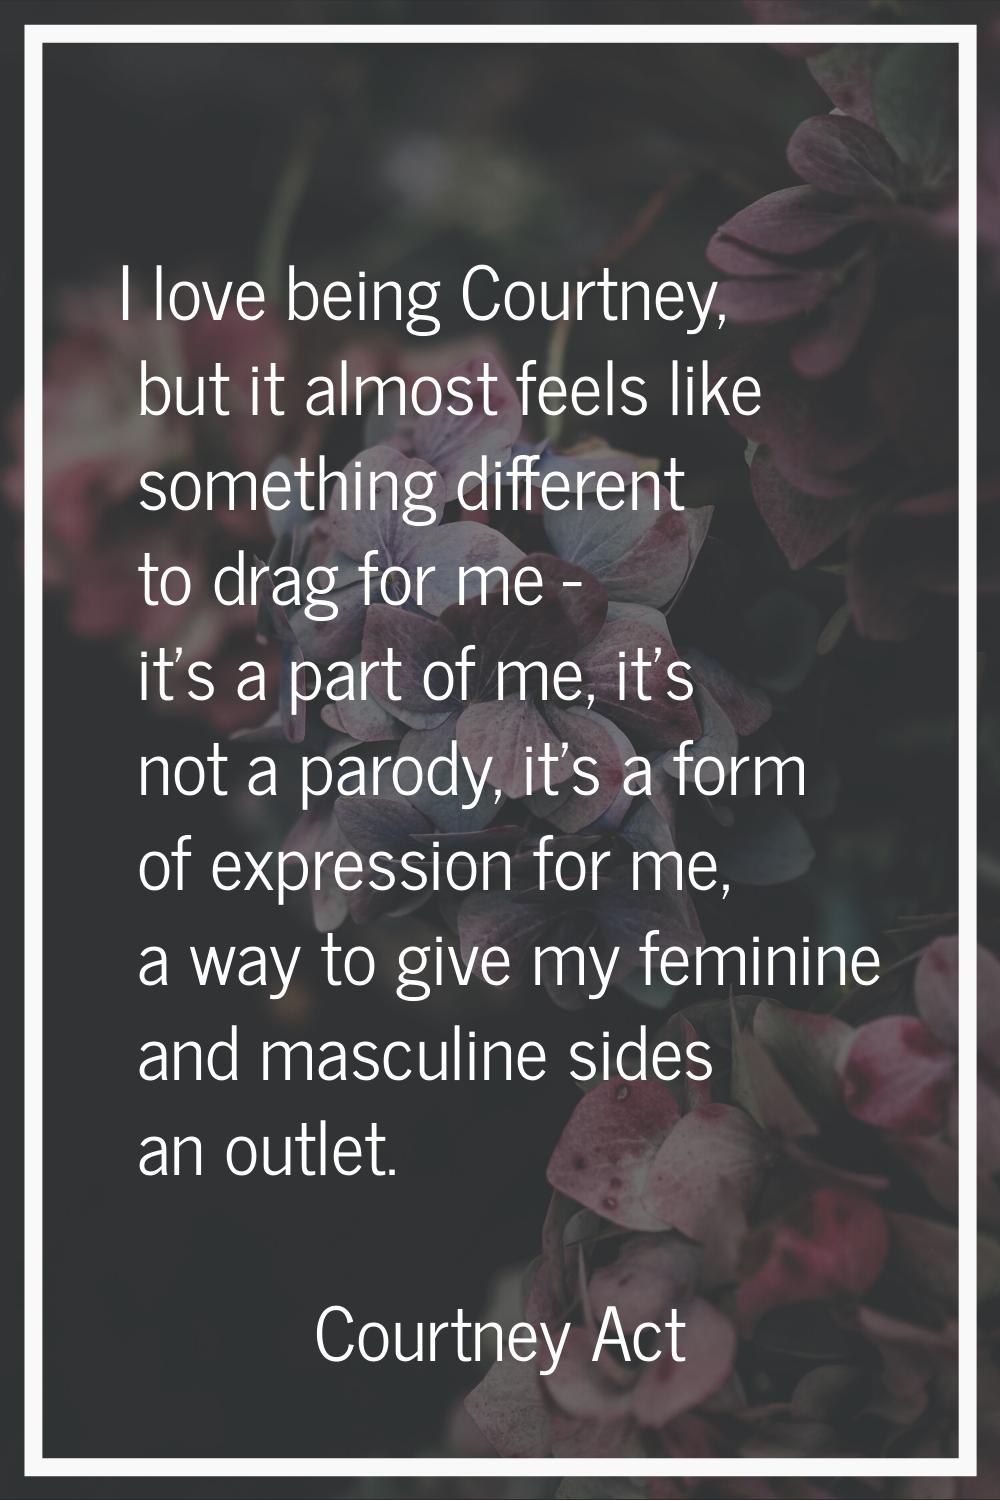 I love being Courtney, but it almost feels like something different to drag for me - it's a part of